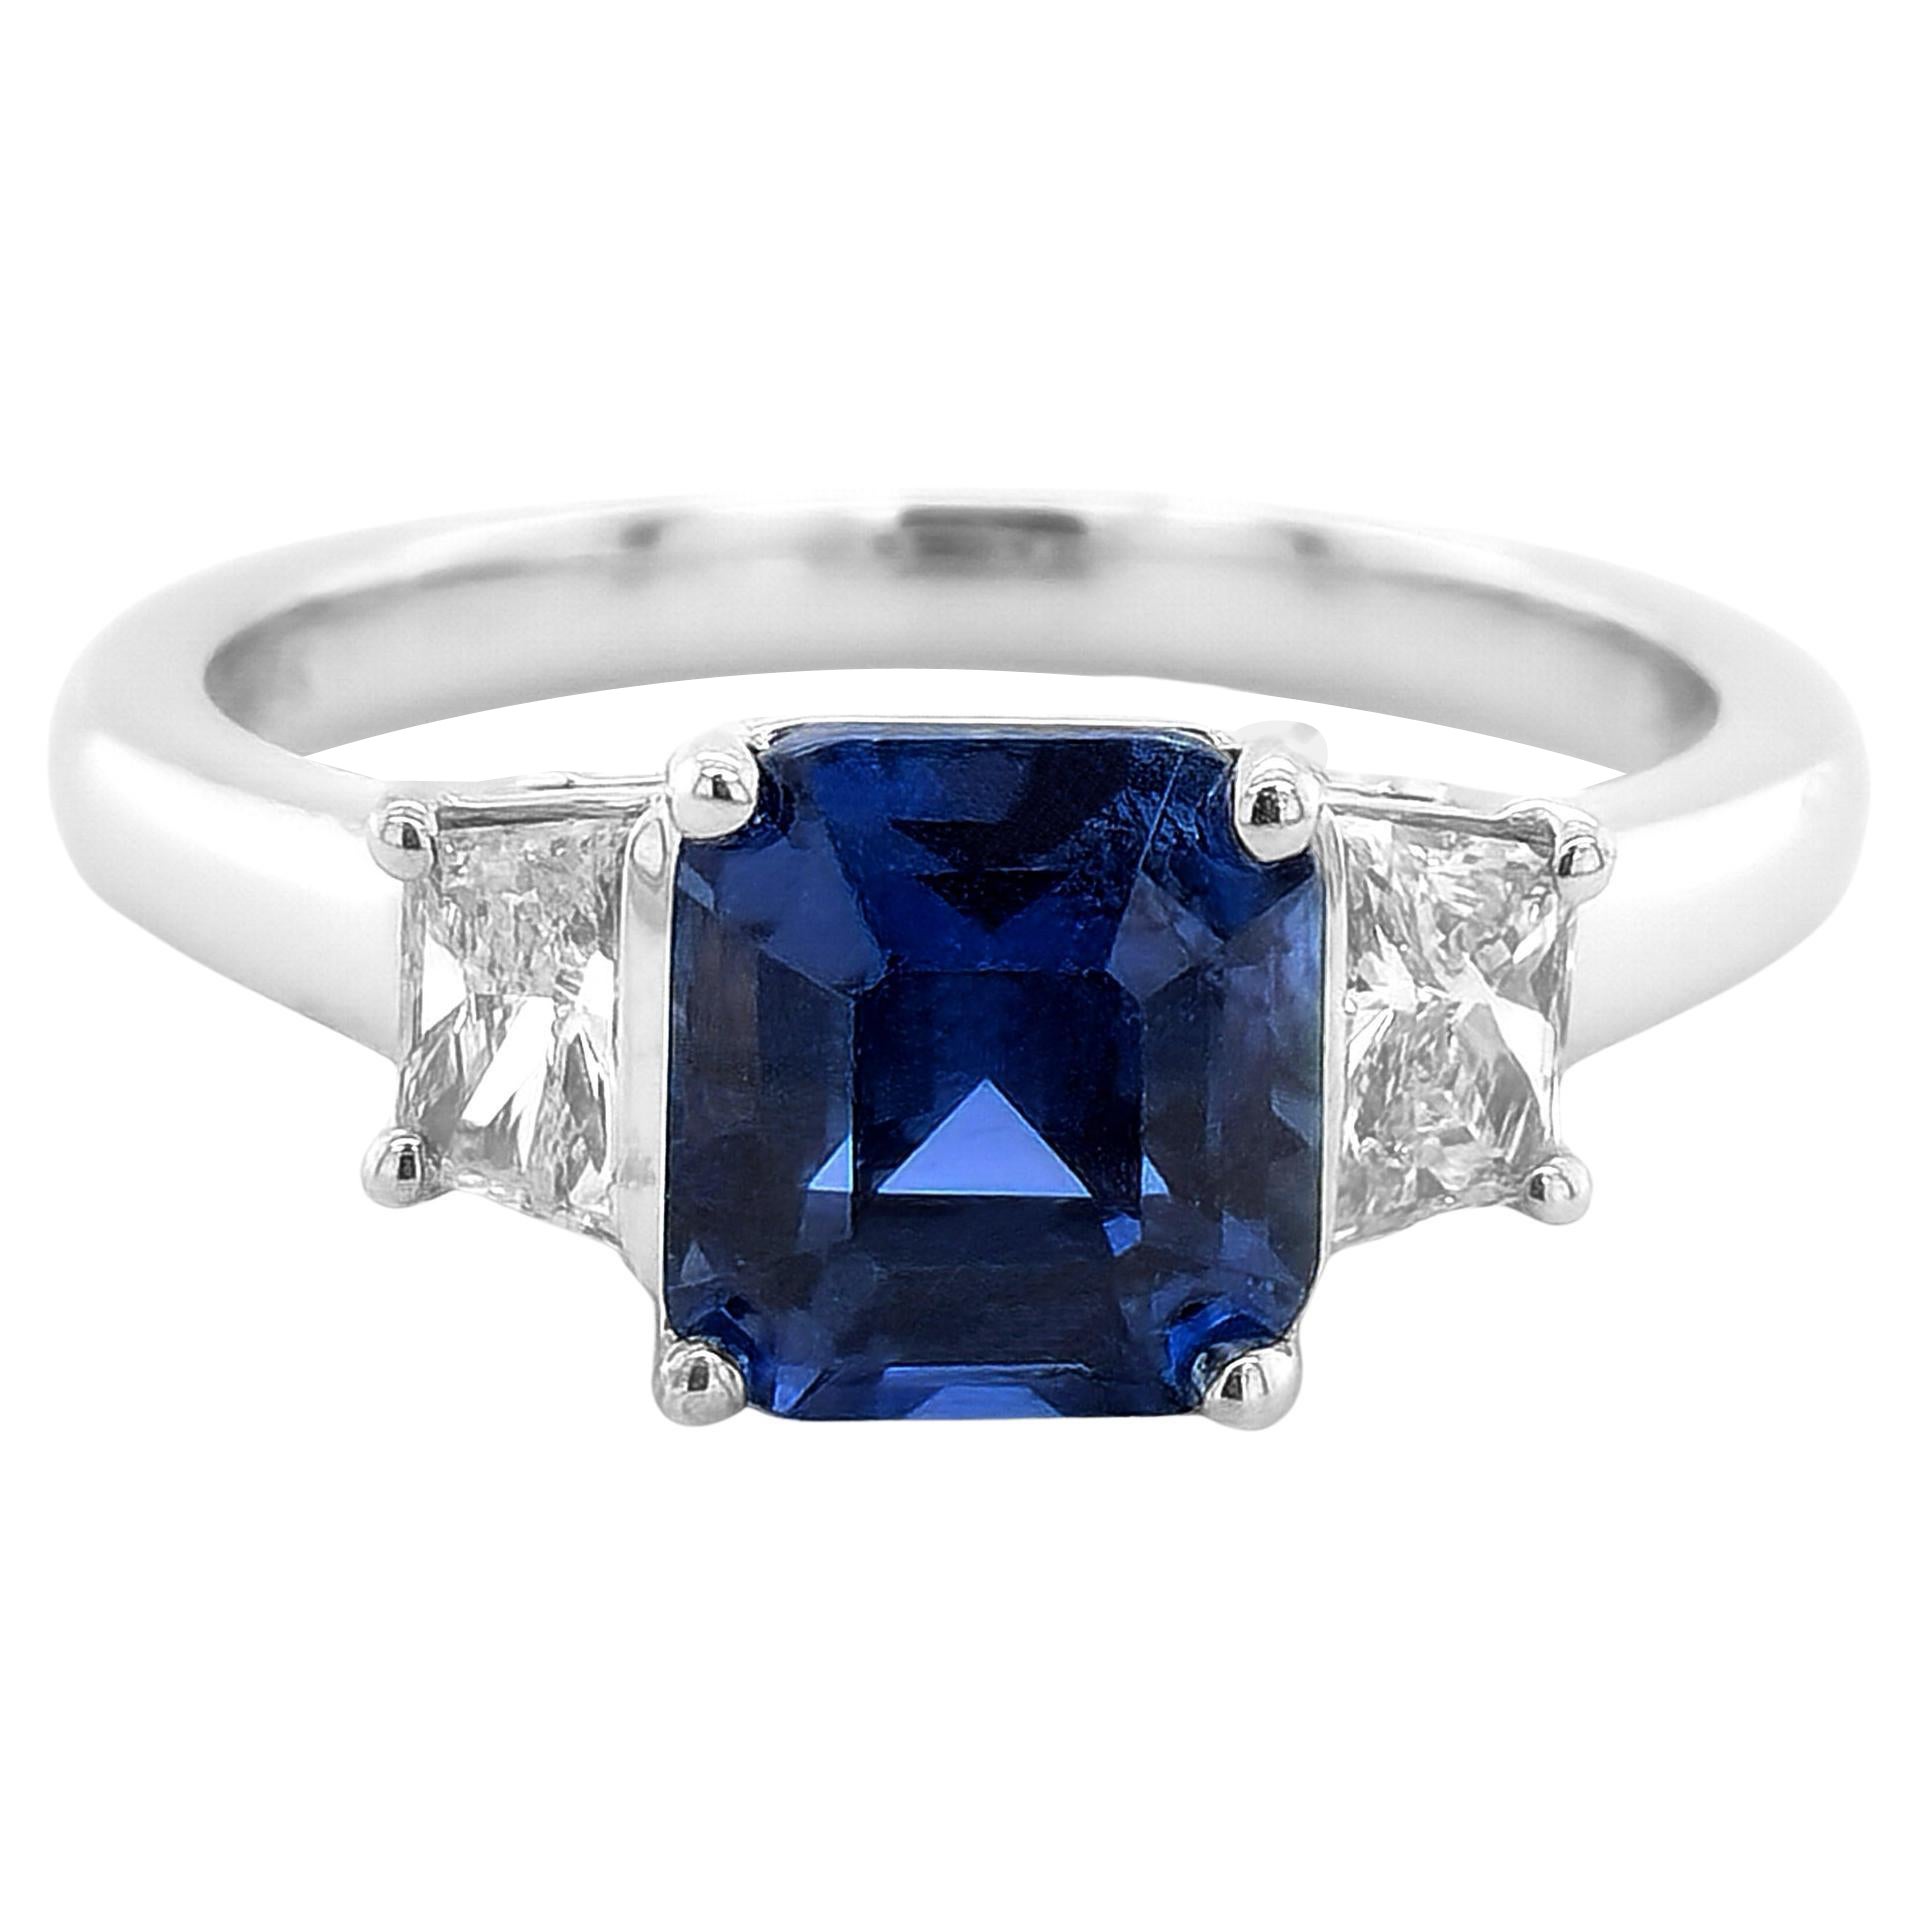 GRS Certified 2.18 Carats Cobalt Spinel Diamonds set in 18K White Gold Ring